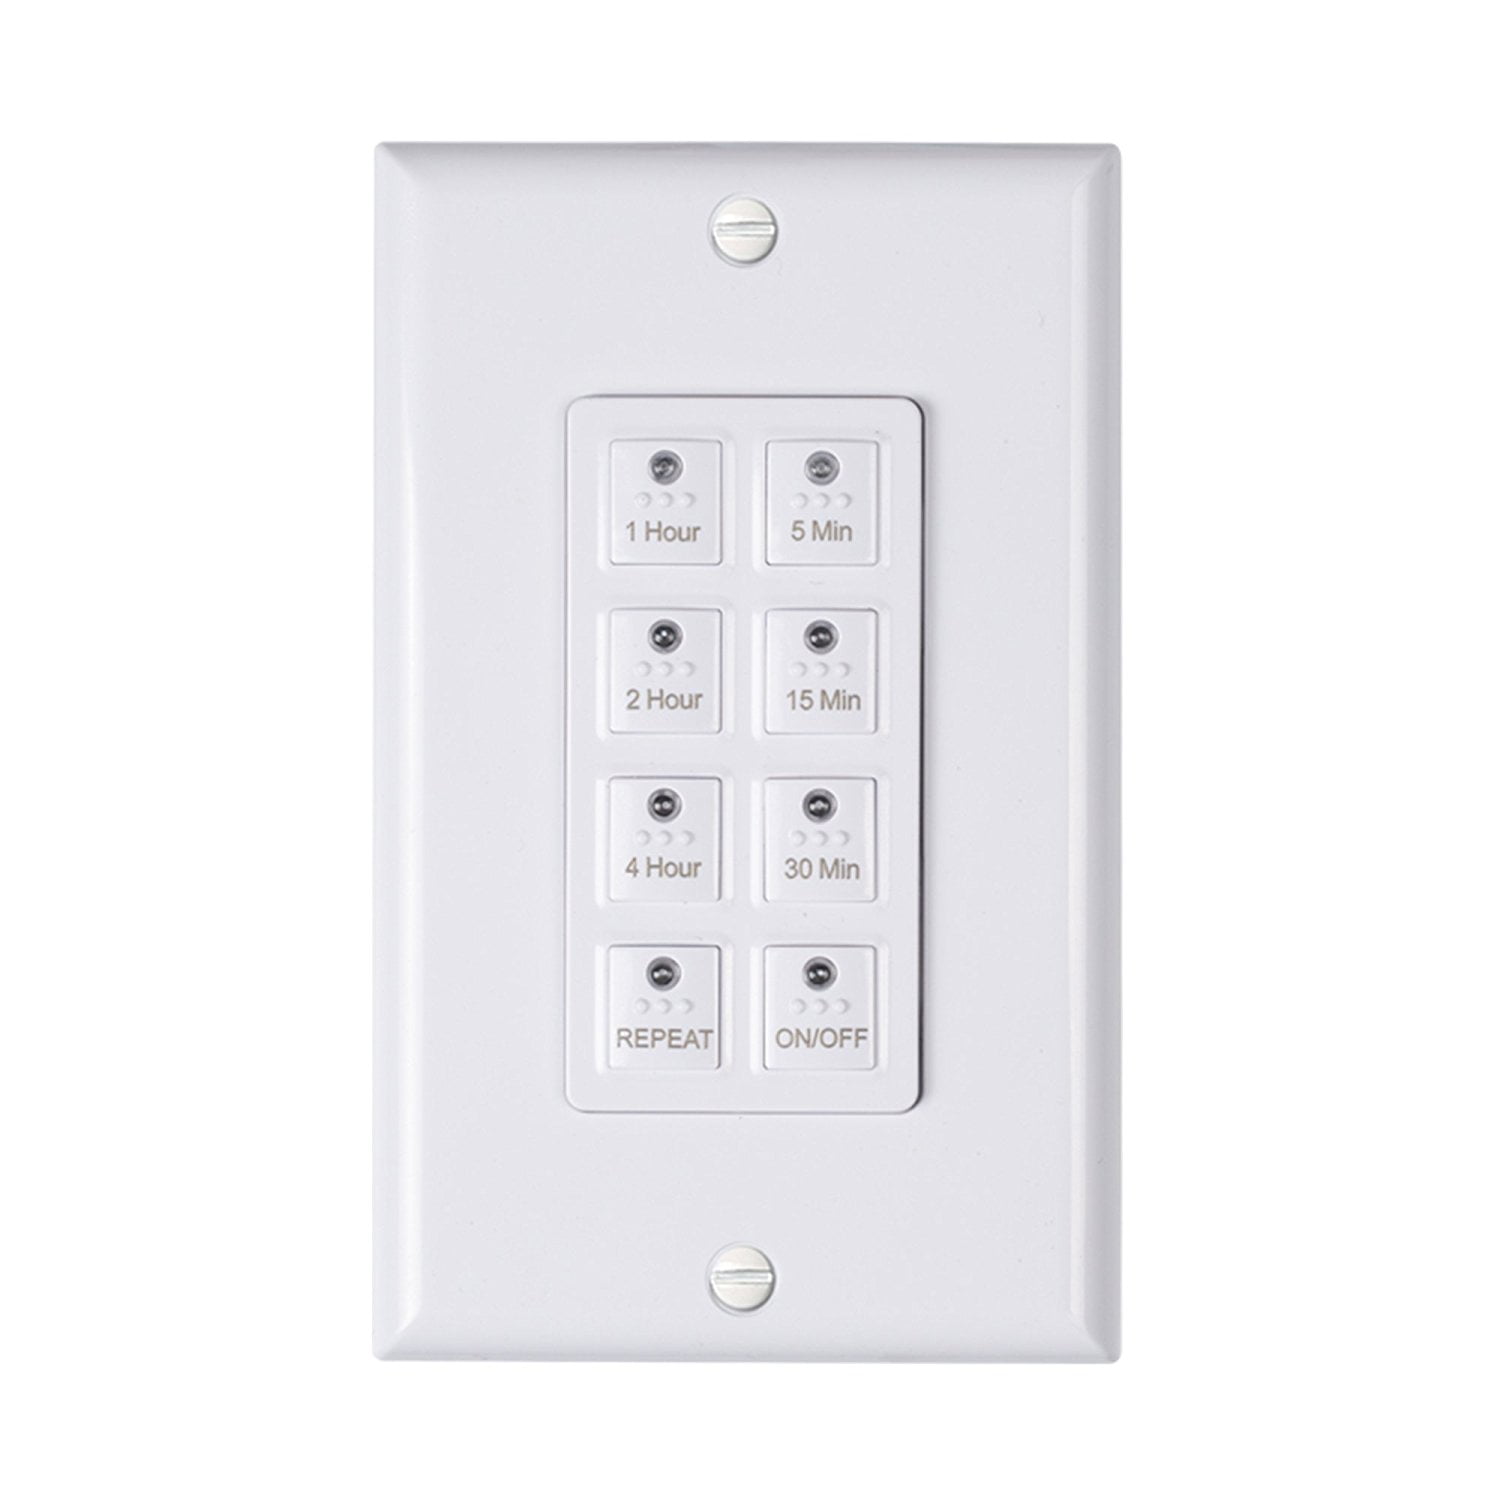 Programmable 15 Amp Single Outlet Hyper Tough Analog Indoor Grounded Timer 